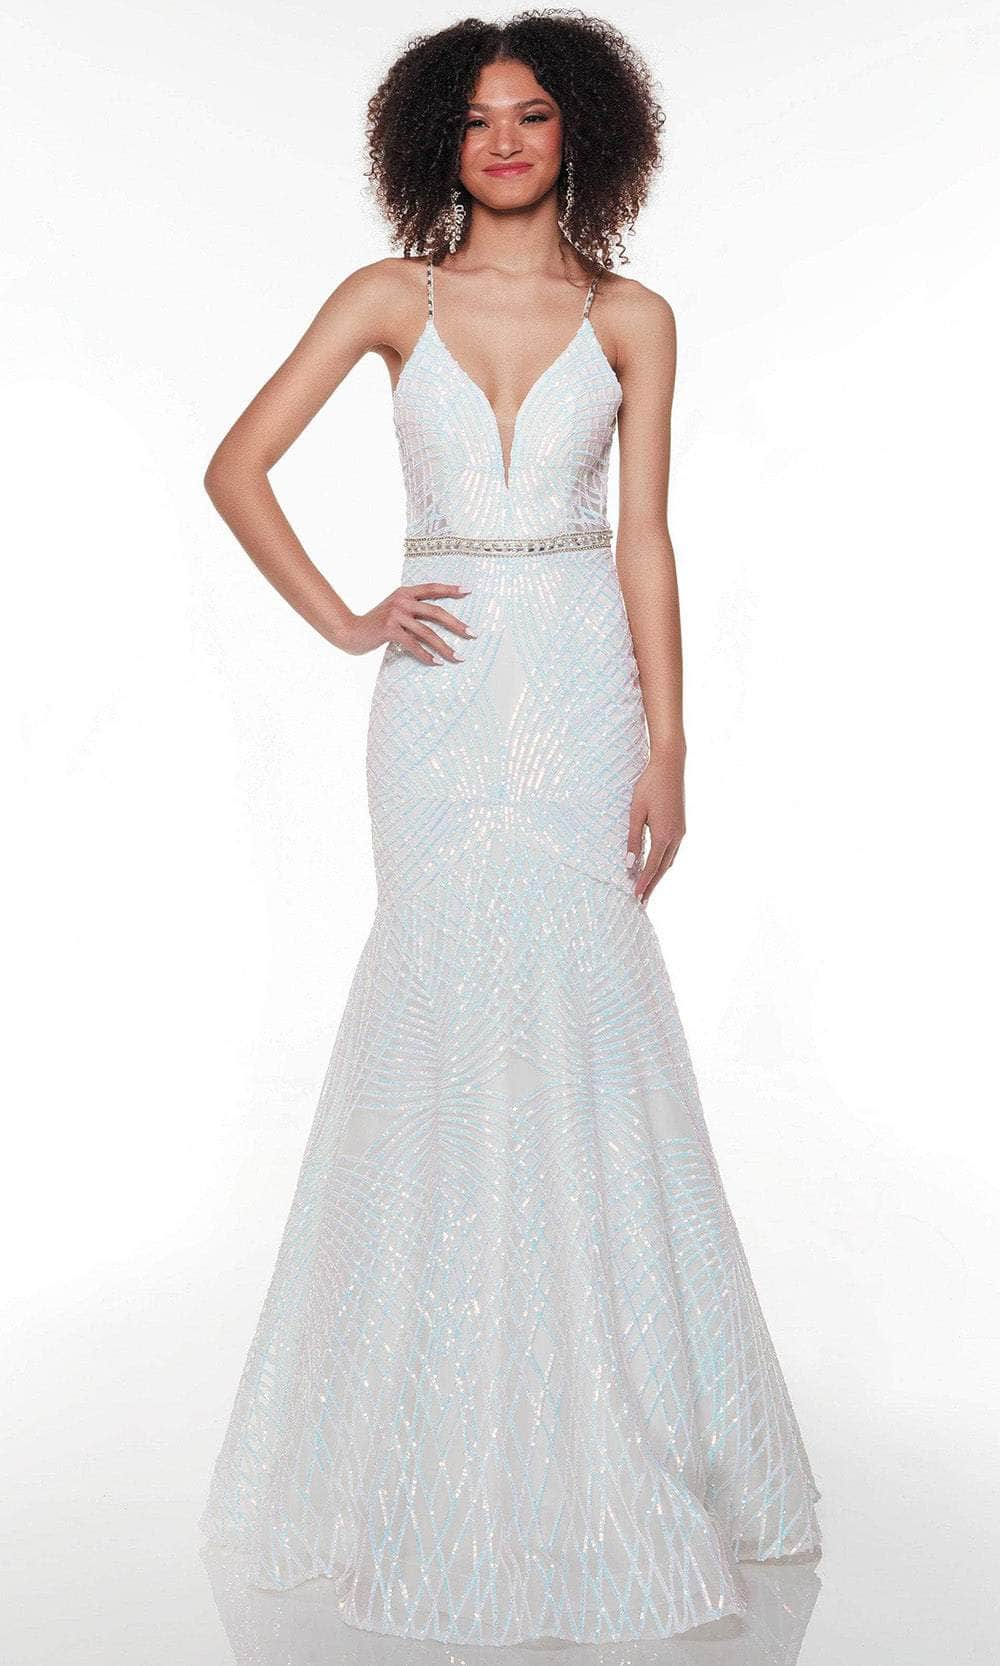 Alyce Paris 61289 - Sleeveless Plunging V-neck Prom Dress Special Occasion Dress 000 / Ivory